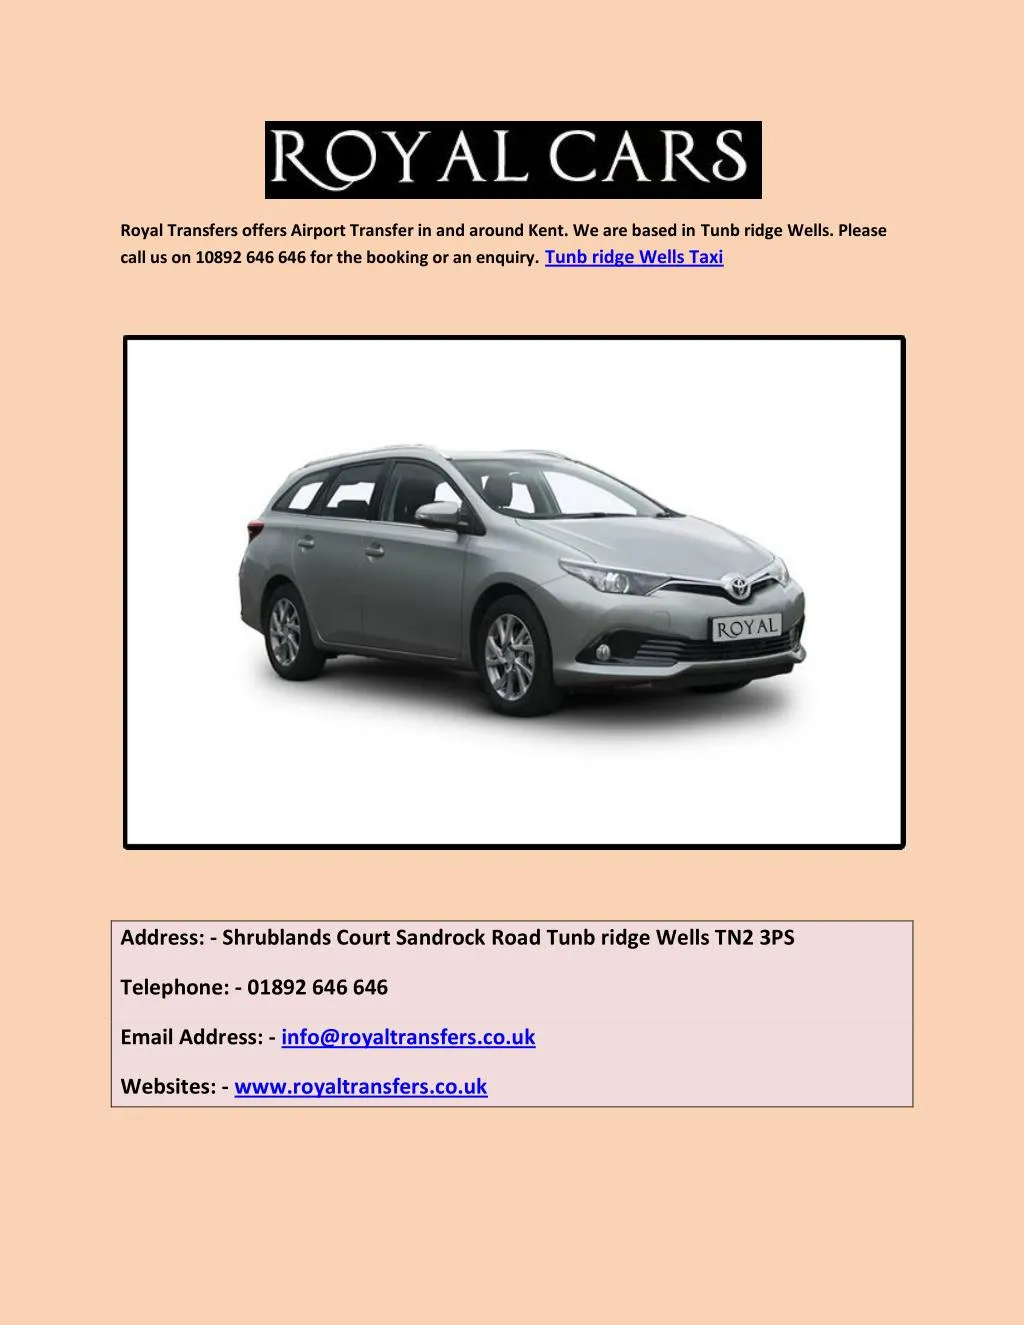 royal transfers offers airport transfer